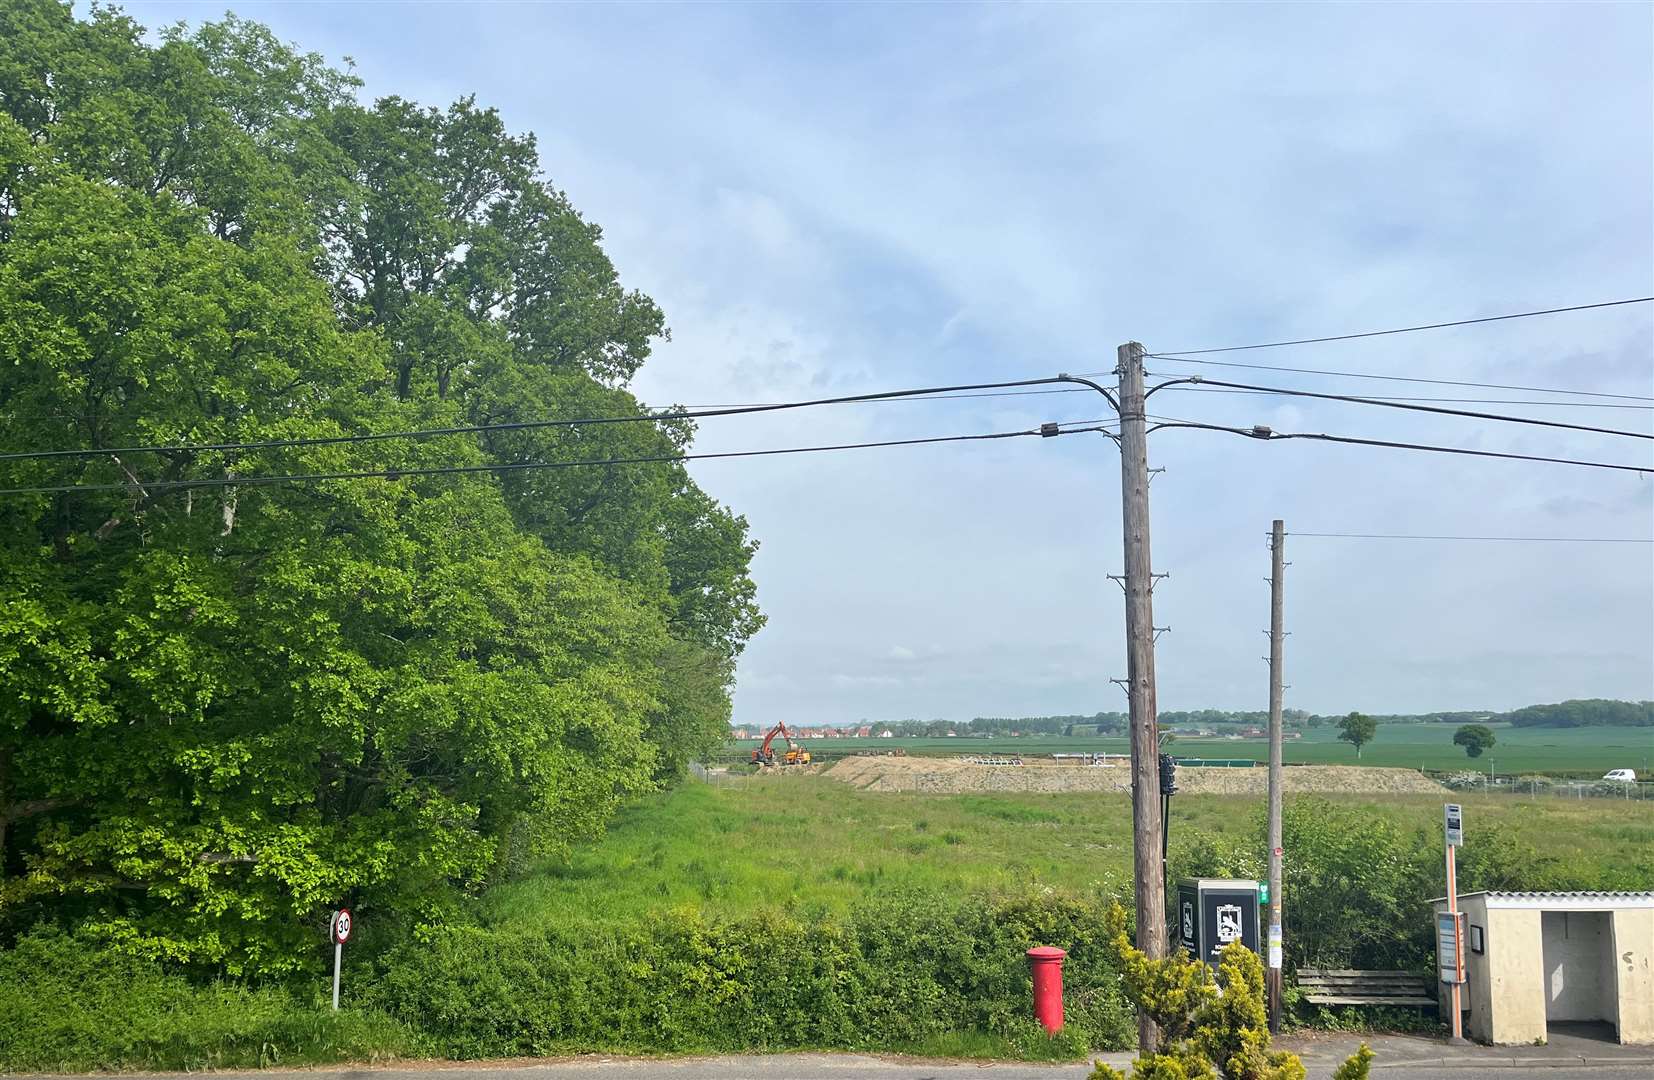 The site would be built next to a pumping station in a field along Chilmington Green Road